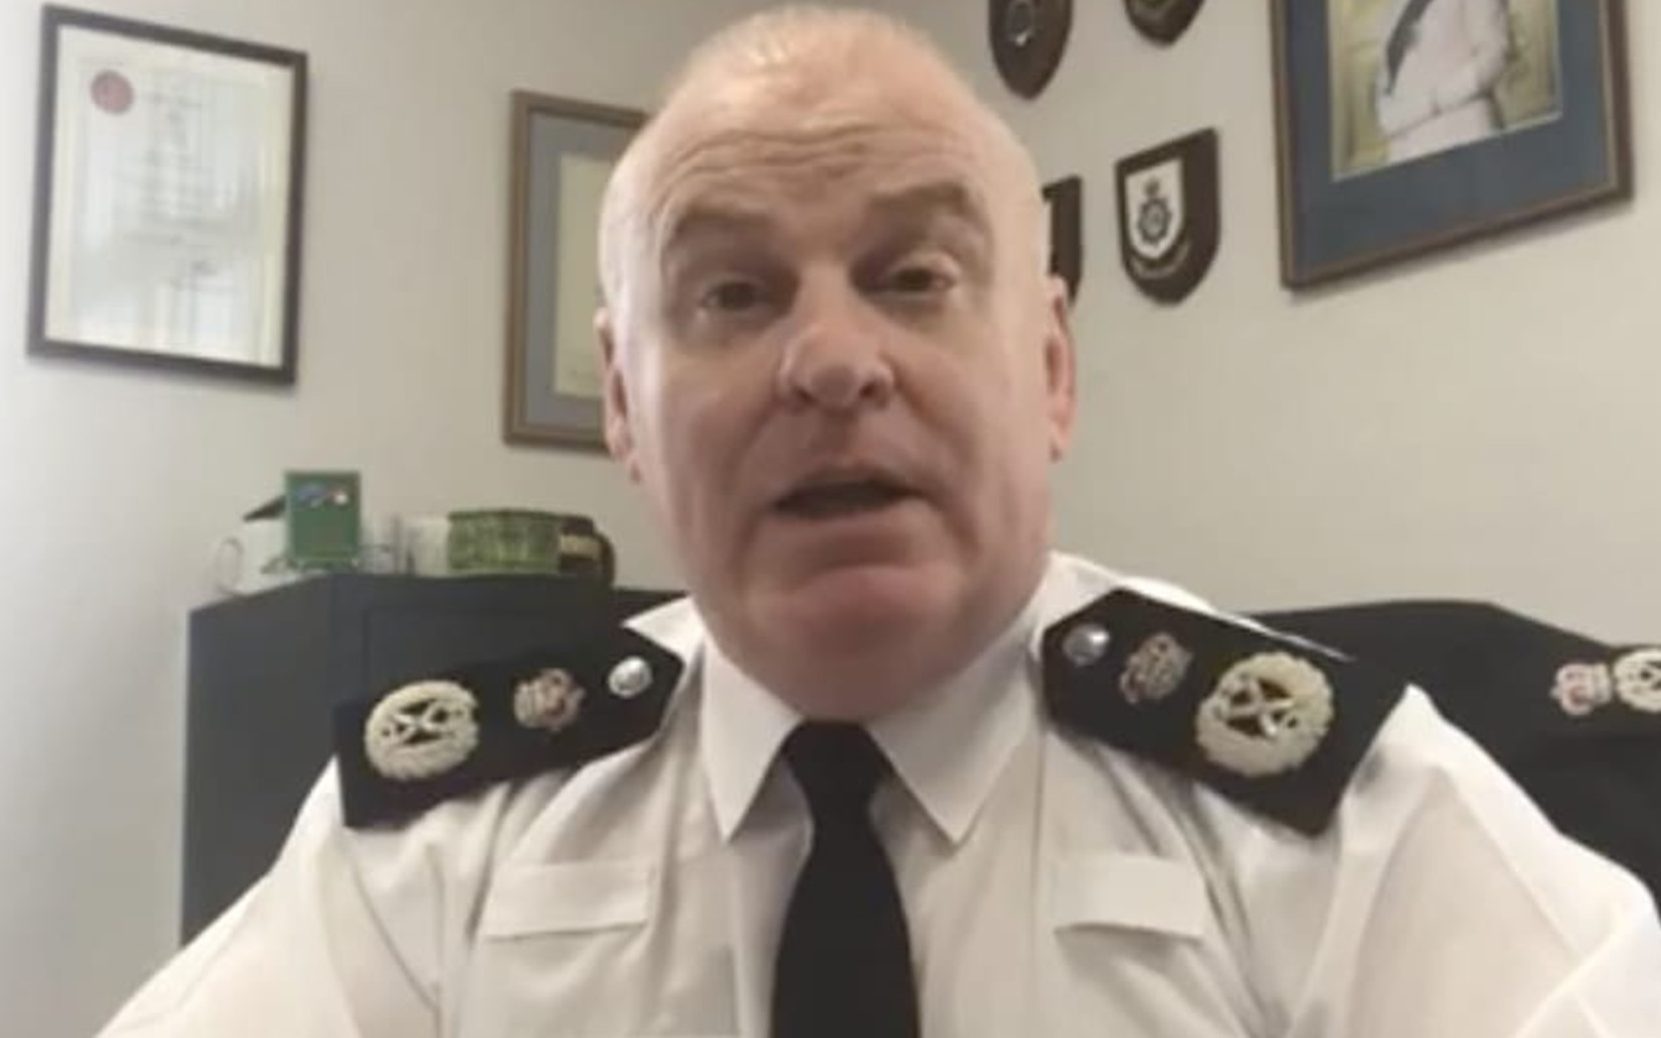 gibraltar police chief ‘forced to step down after looking into high-level corruption’